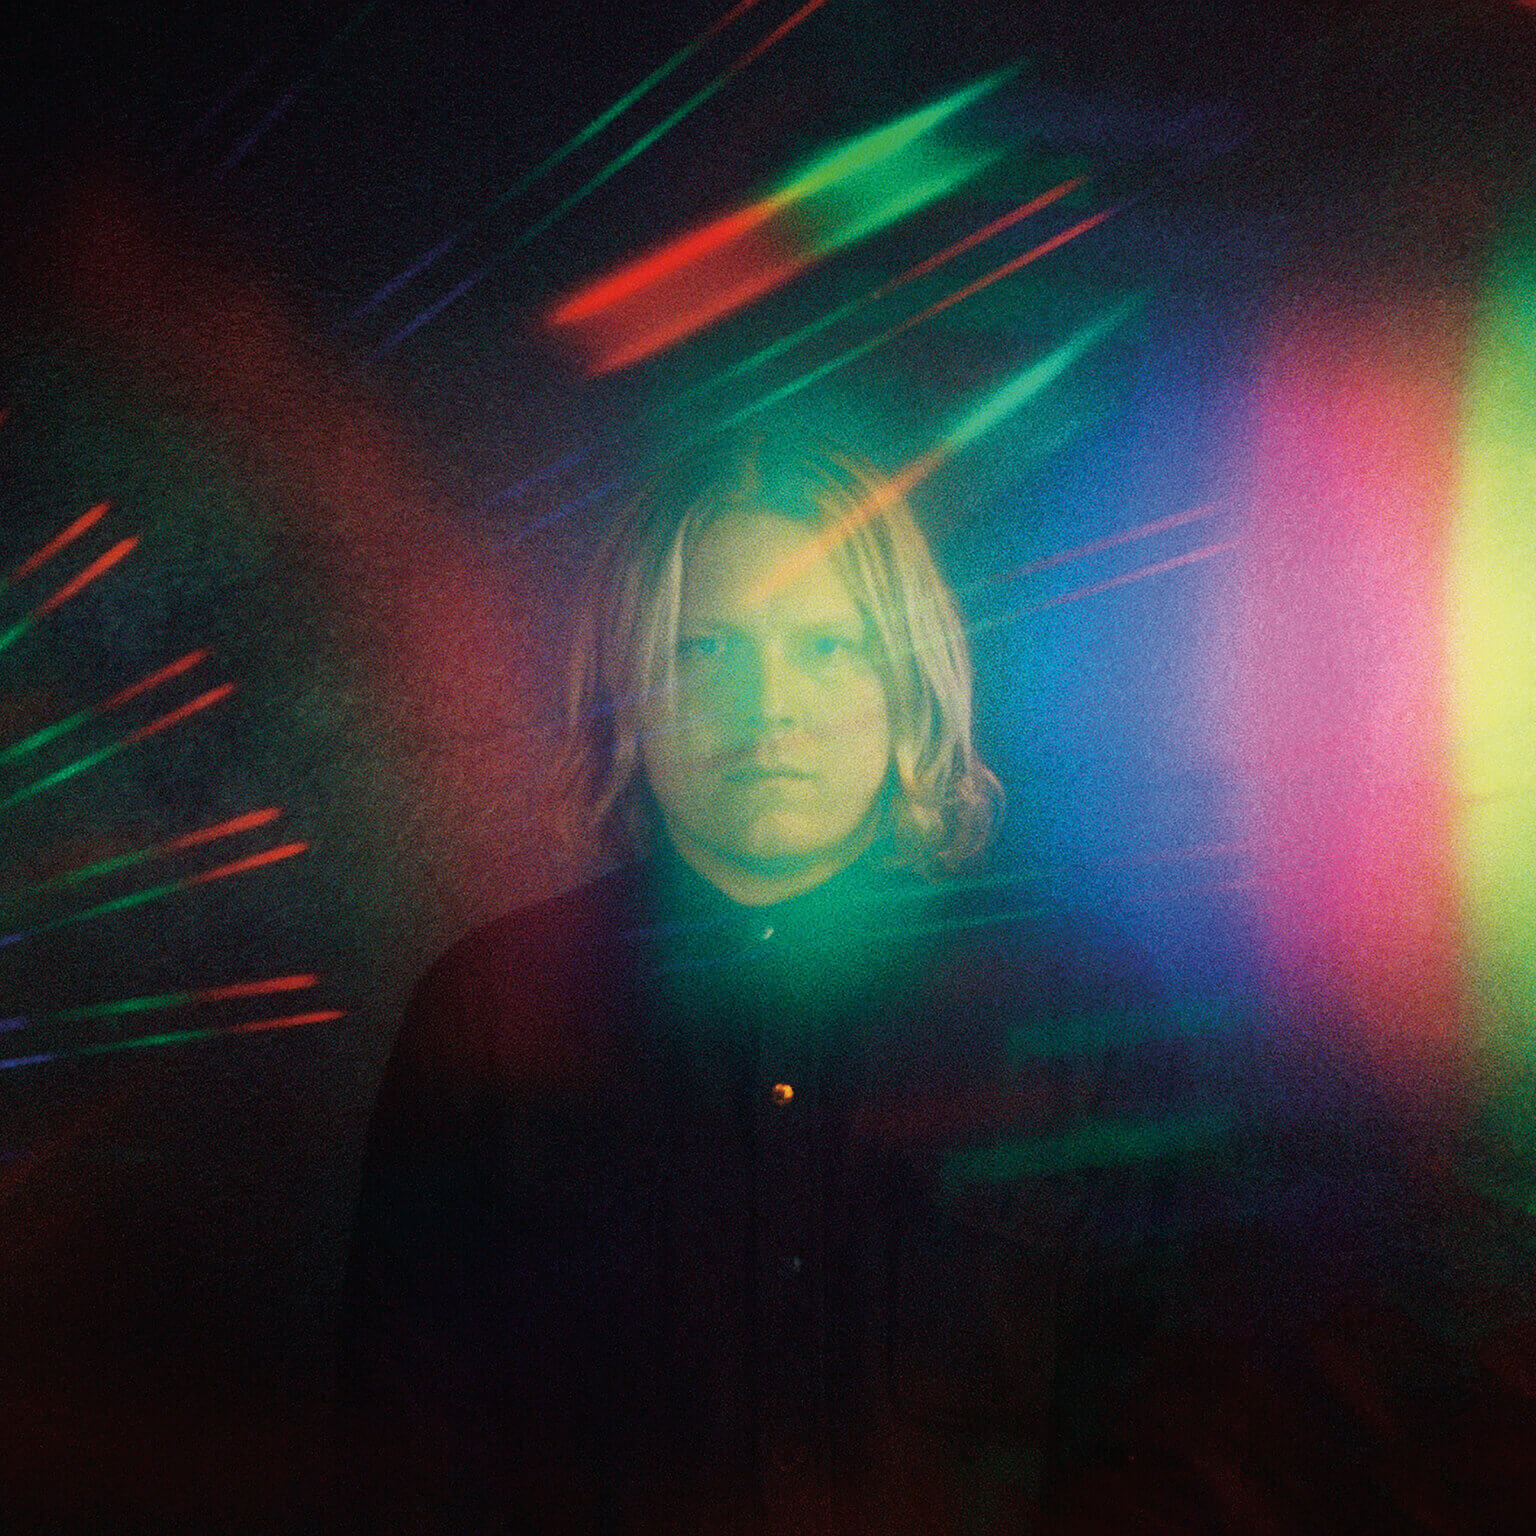 Ty segall and his freedom band has released their new LP Harmonizer, the album is available to stream today, via Drag City Records